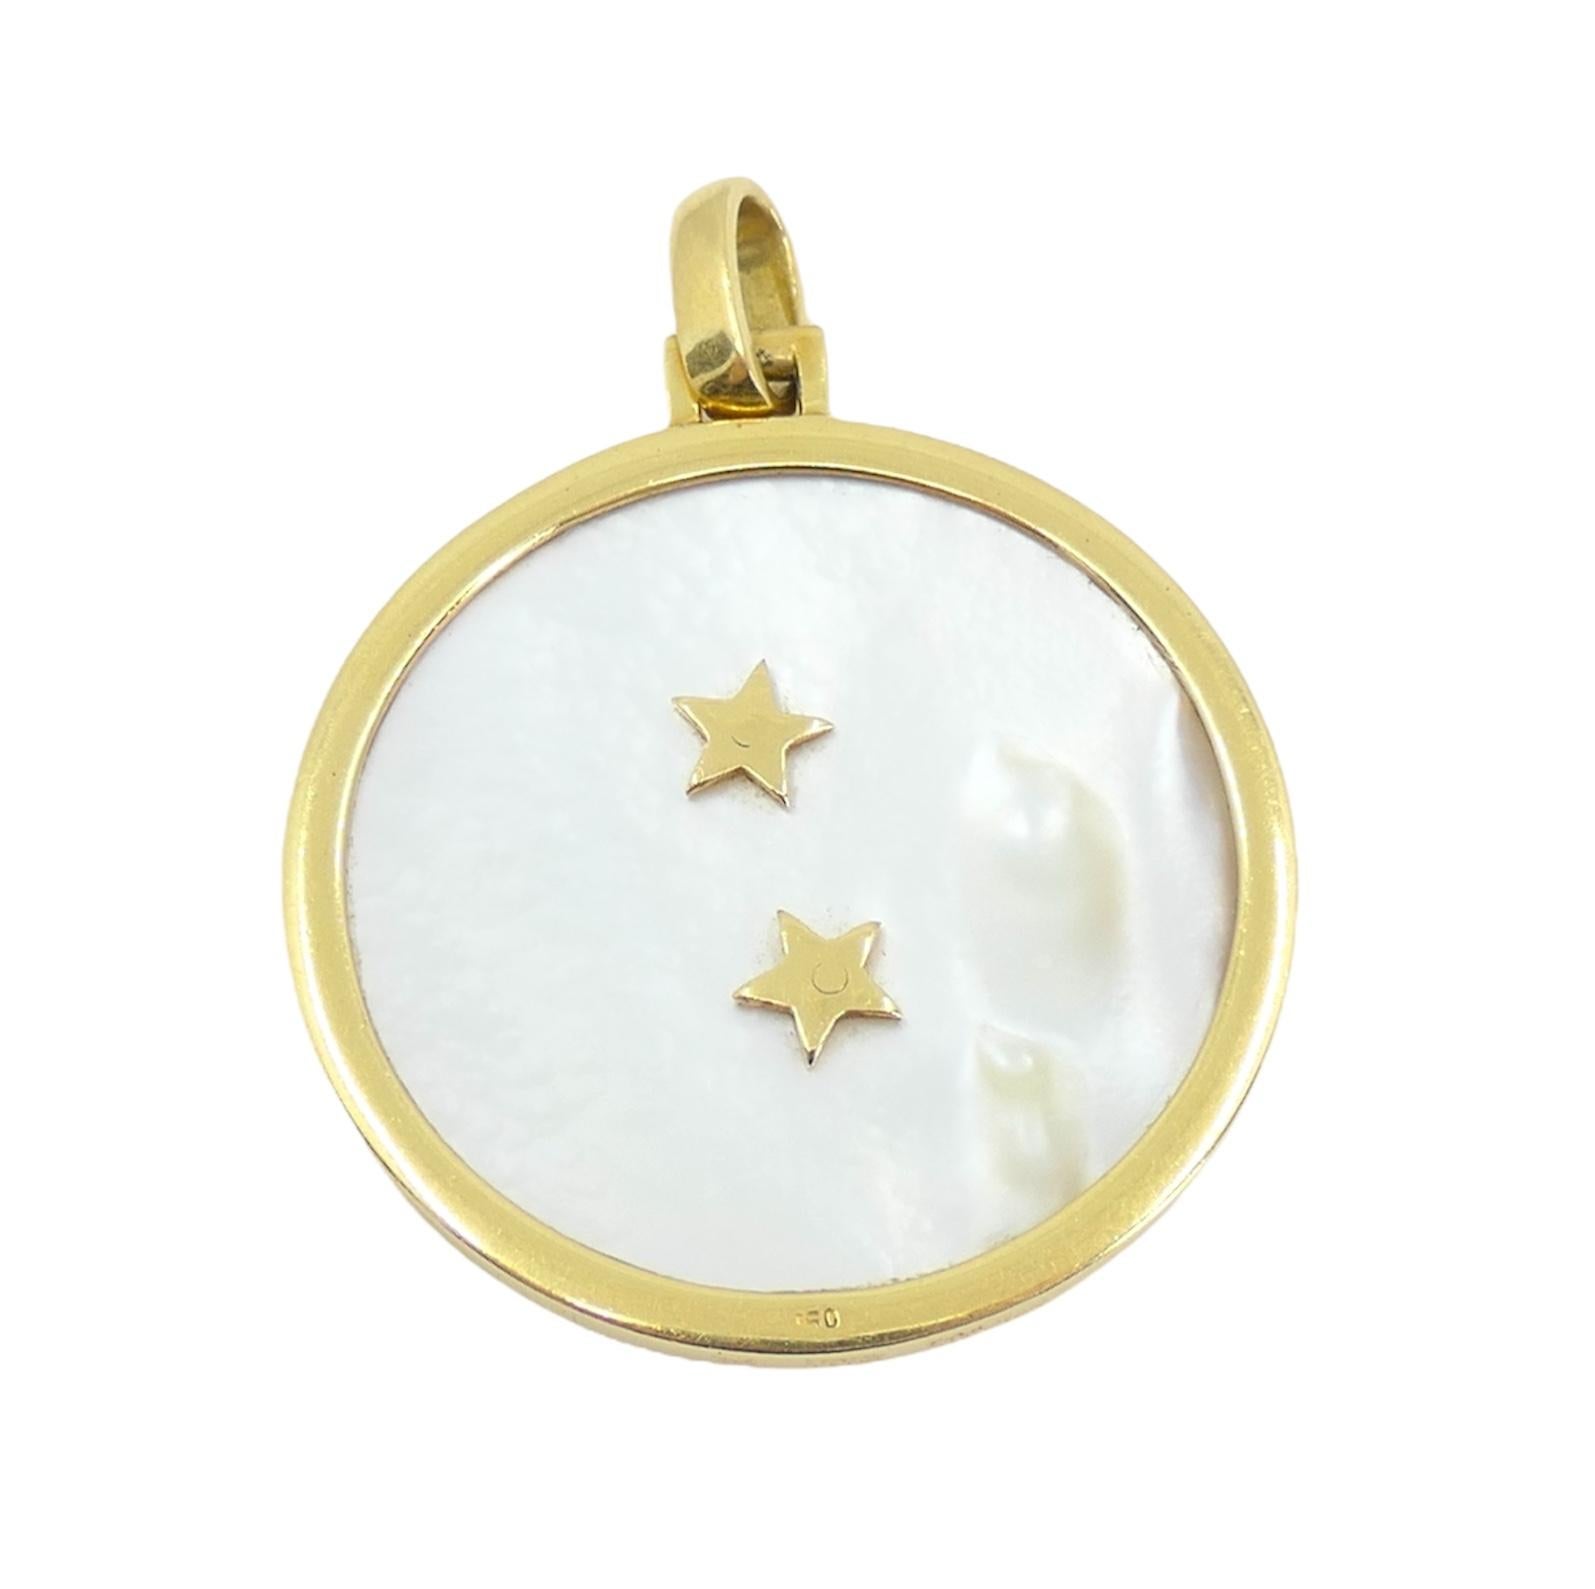 Crafted in the timeless allure of the 1970s, the Vintage Bvlgari Libra Zodiac pendant embodies celestial elegance. Fashioned from lustrous 18k gold and adorned with exquisite mother of pearl, this pendant is a testament to impeccable craftsmanship.